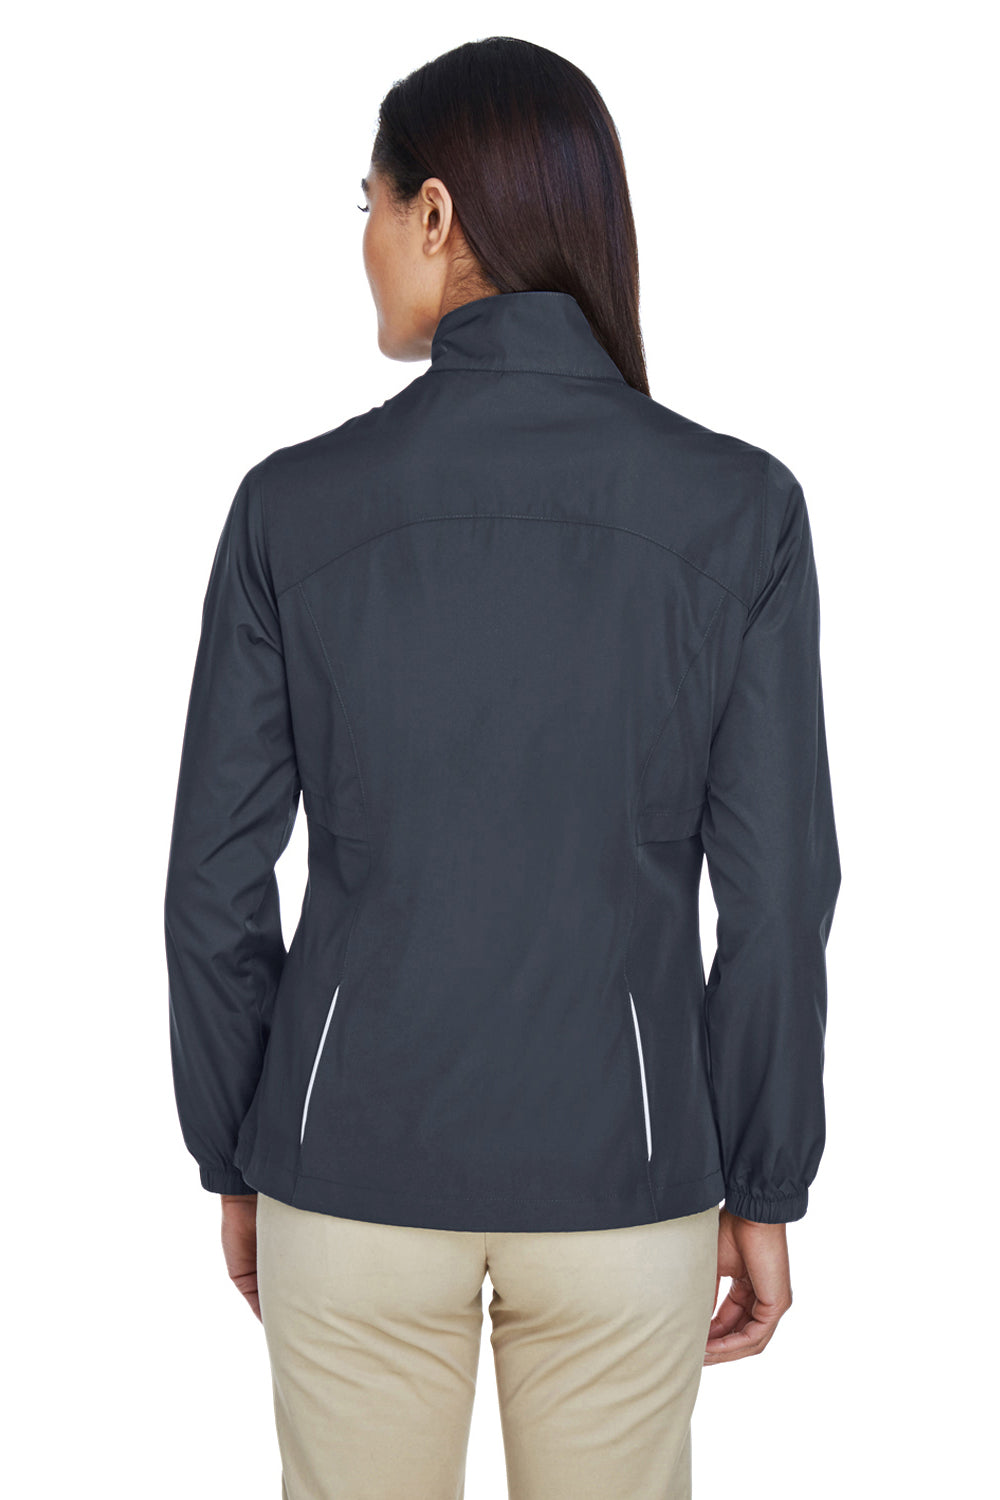 Core 365 78183 Womens Motivate Water Resistant Full Zip Jacket Carbon Grey Back